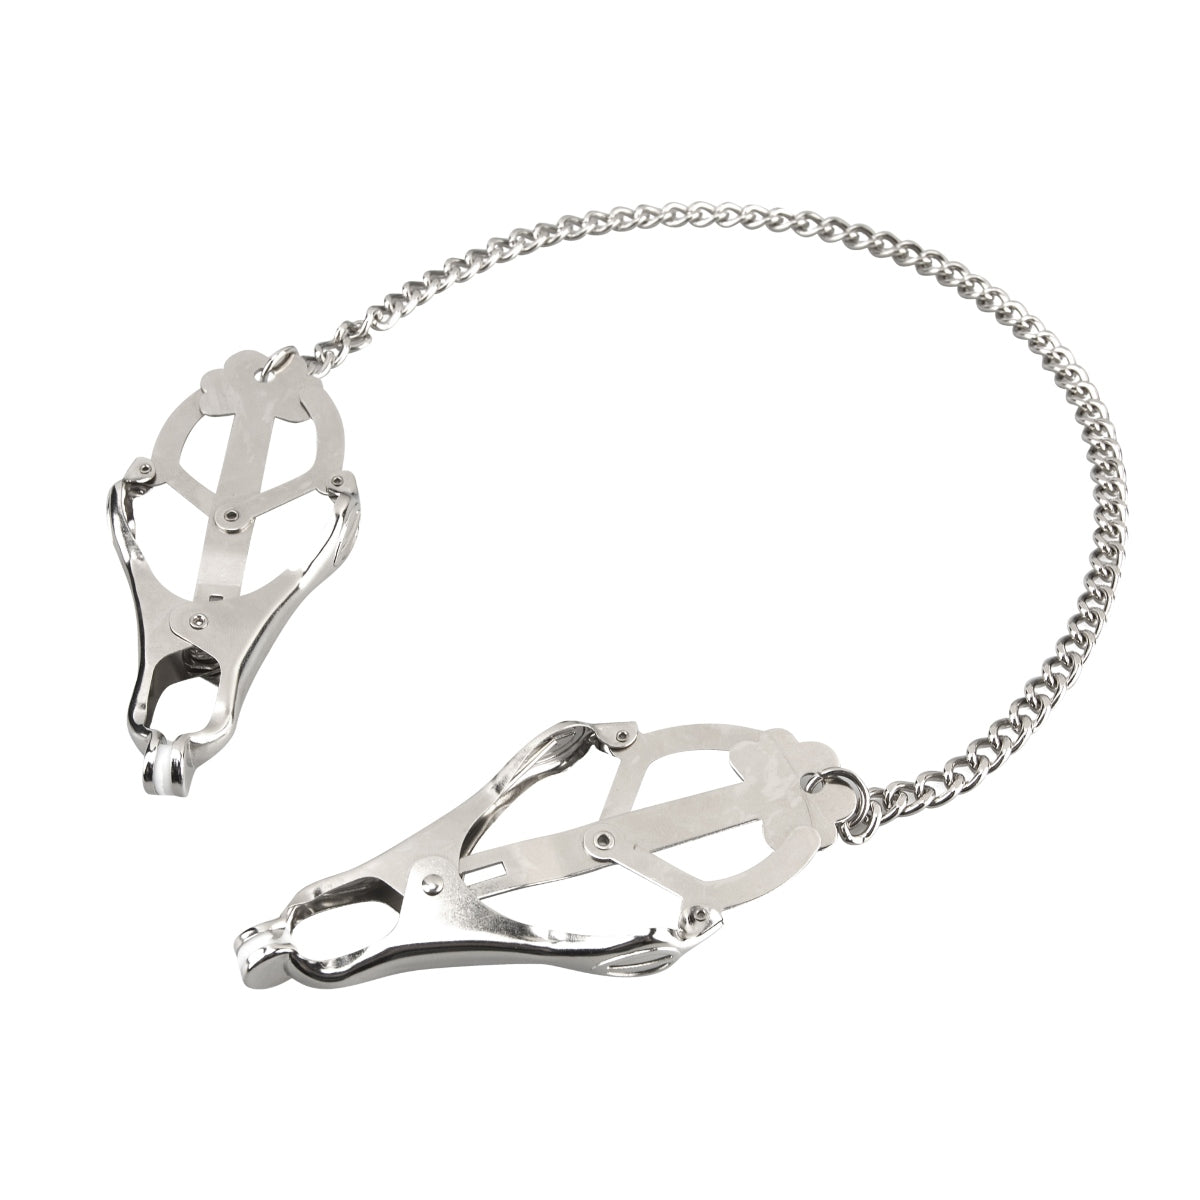 Lux Fetish Japanese Clover Nipple Clips Silver Simply Pleasure